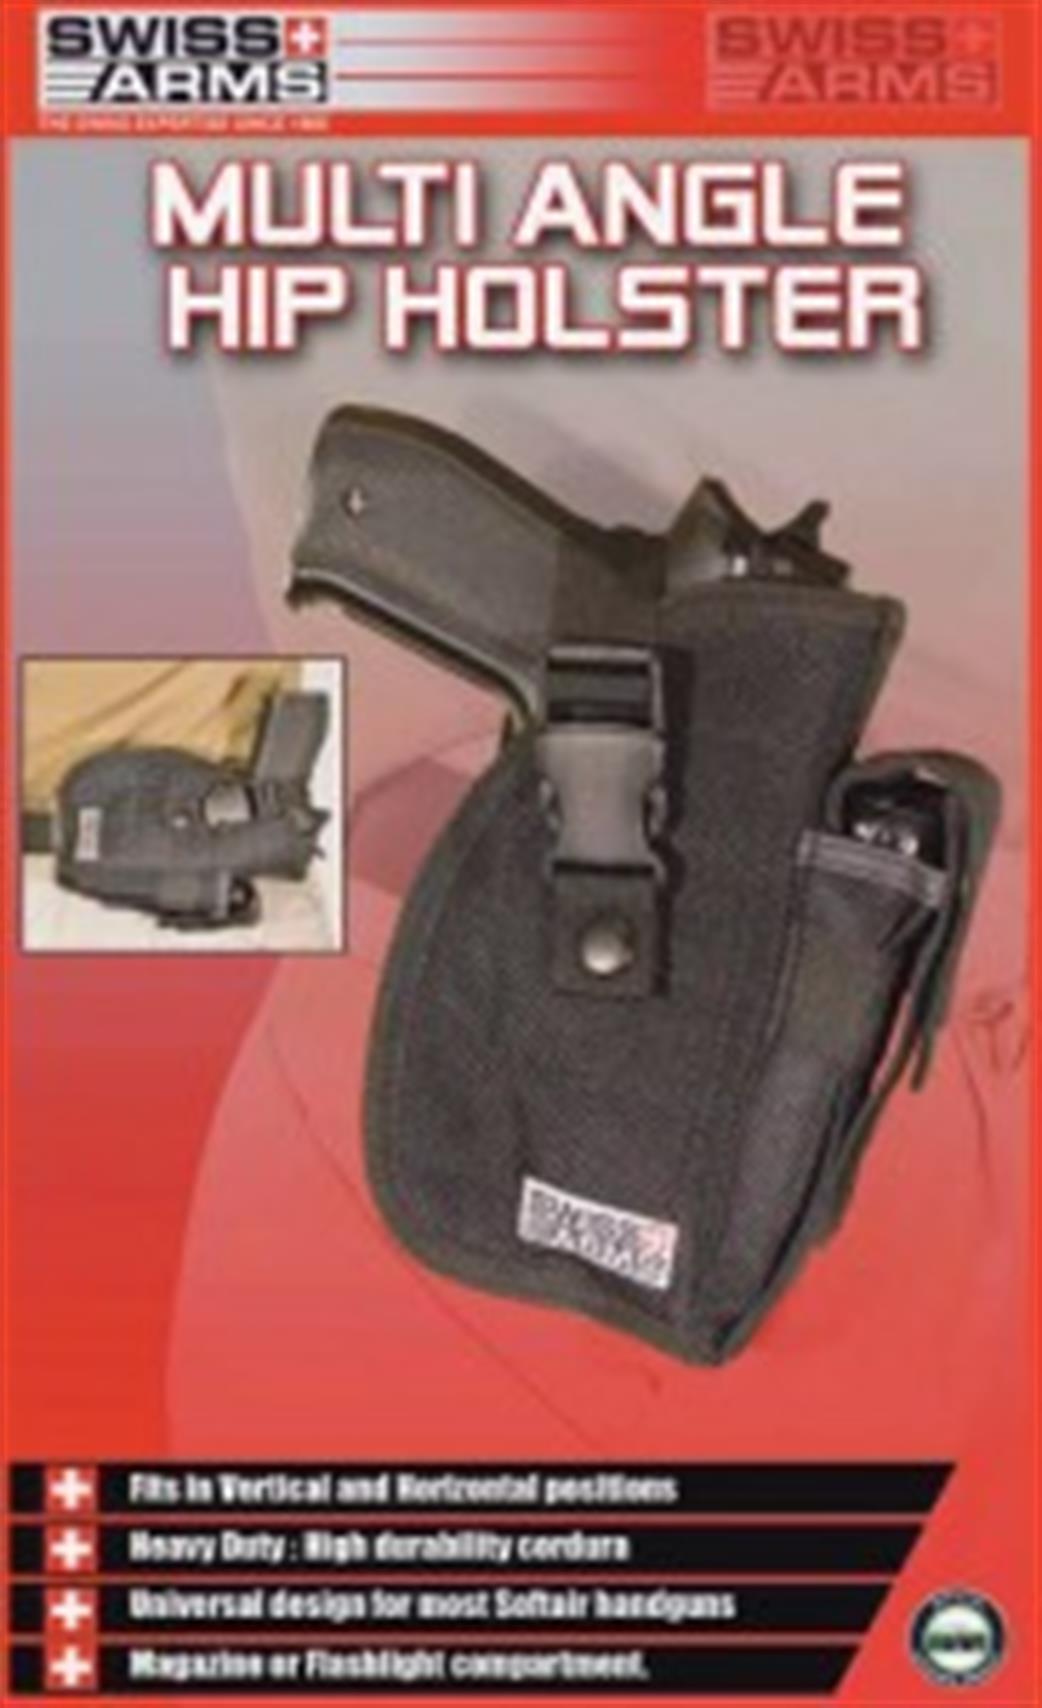 Swiss Arms 603614 Multi Angle Hip Holster